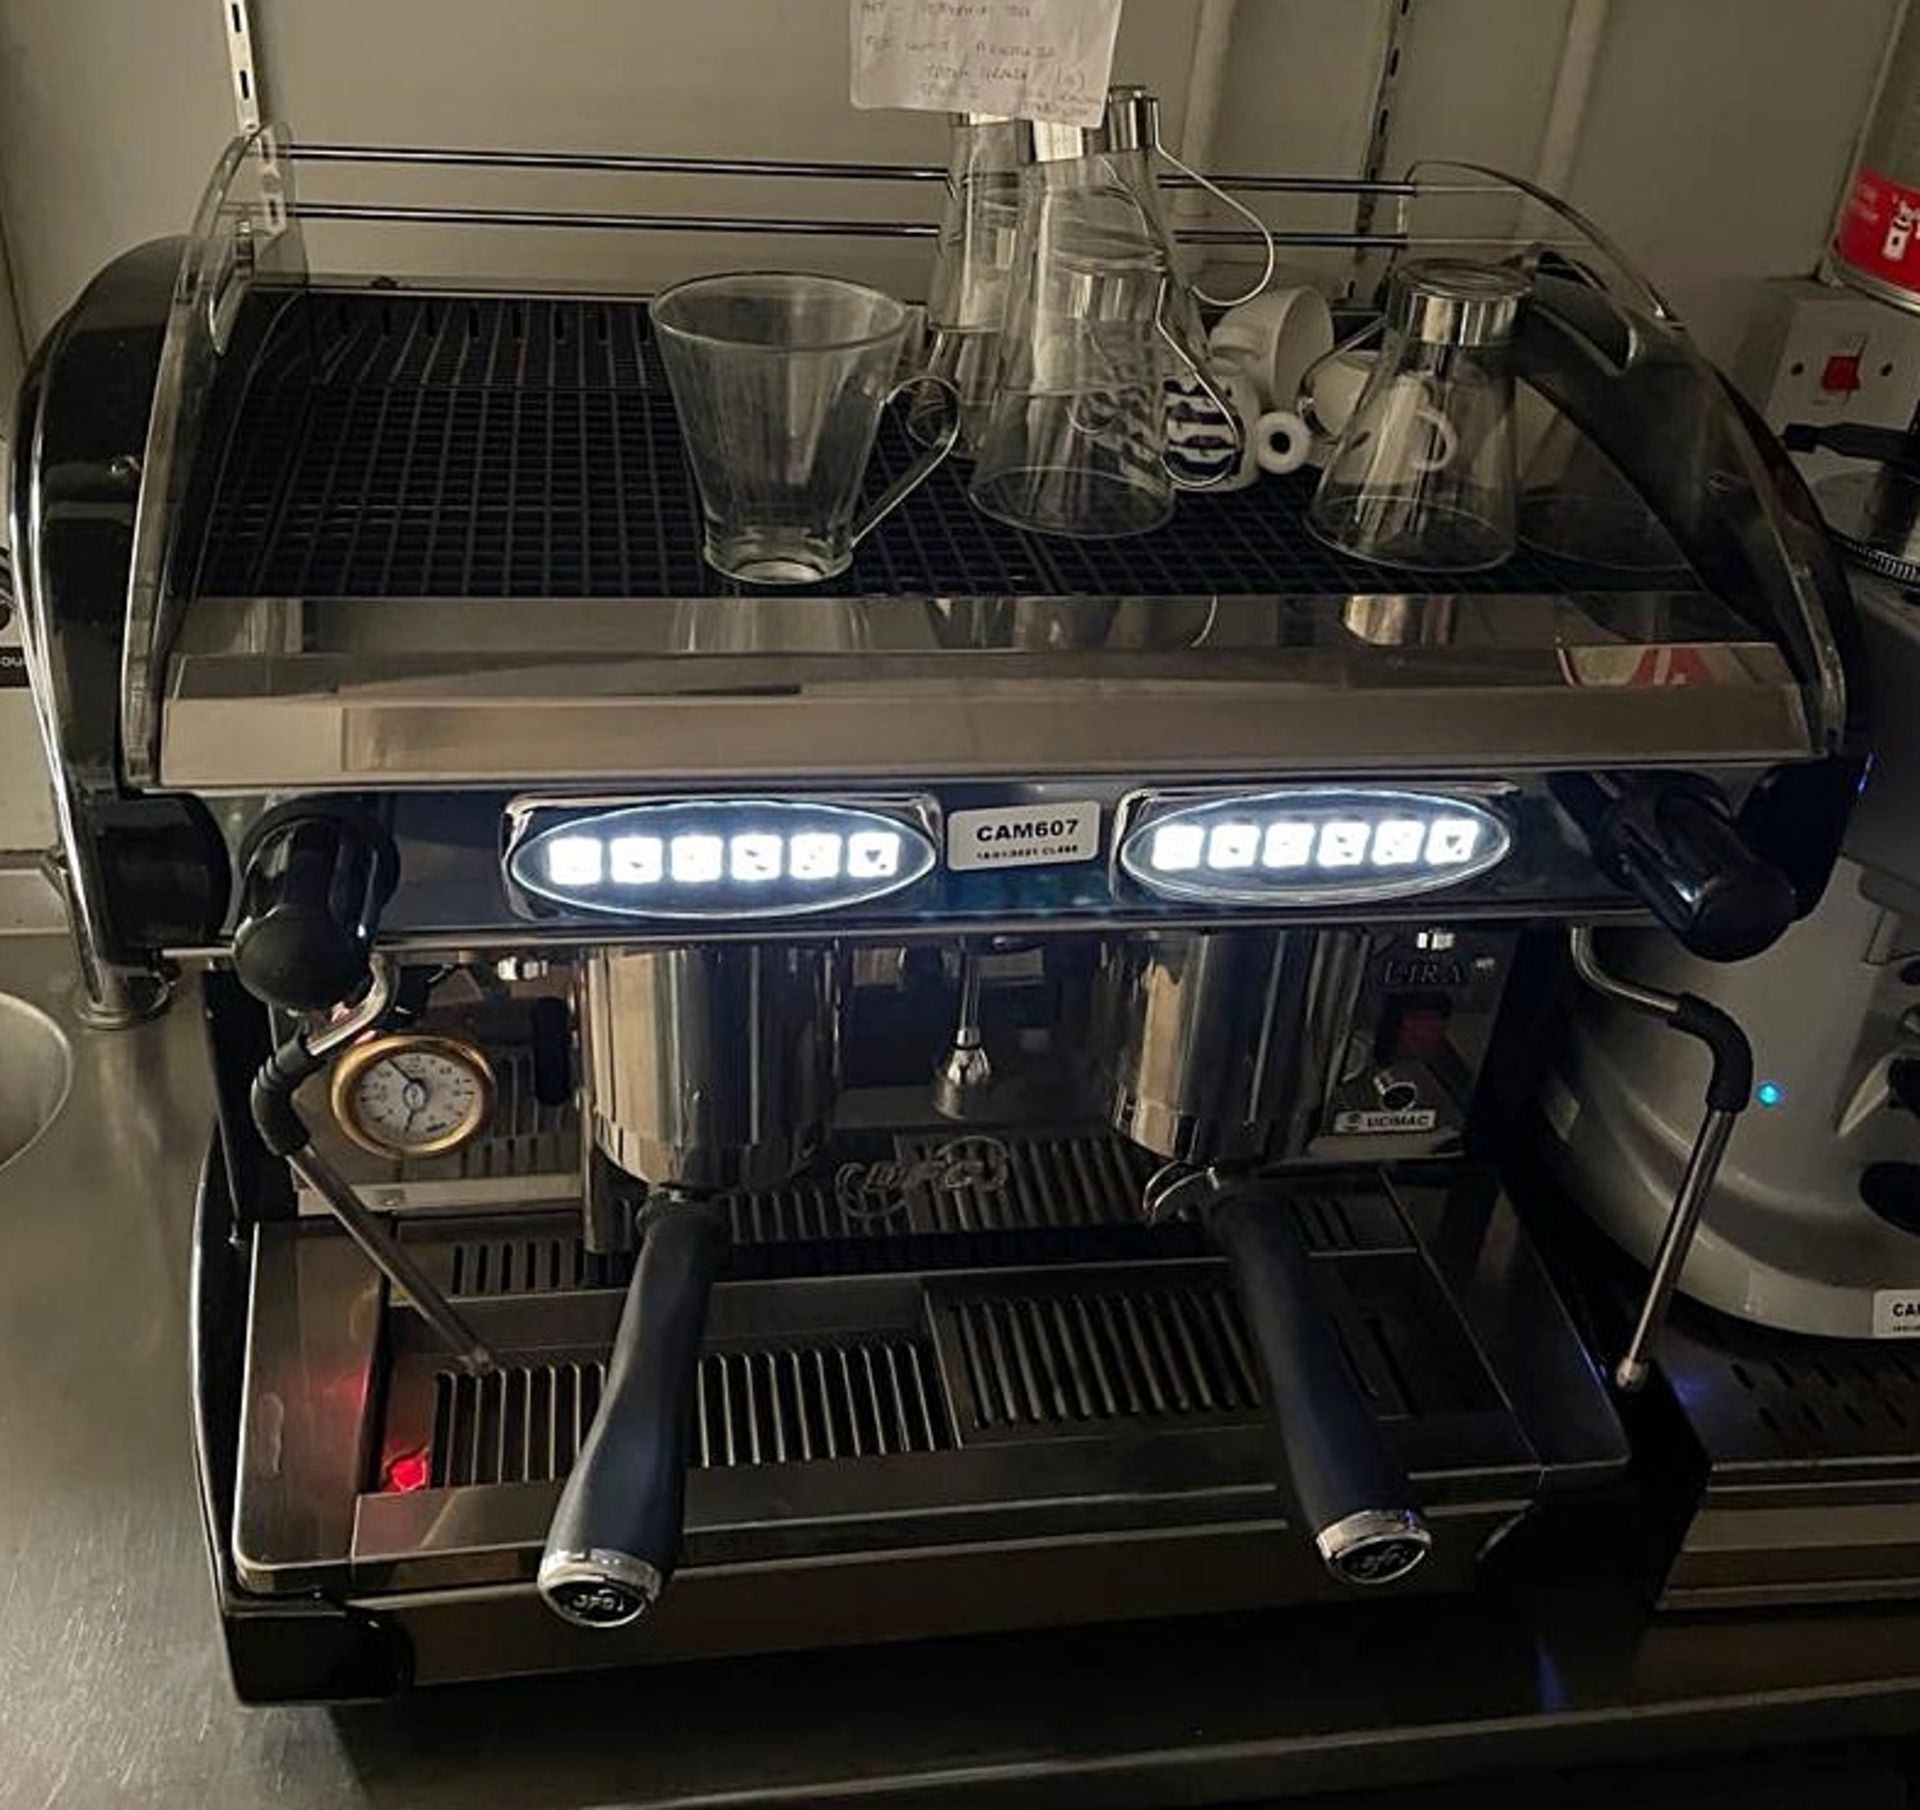 1 x BFC LIRA 2-Group Automatic Commercial Espresso Professional Coffee Machine - Ref: CAM607 - CL612 - Image 5 of 8